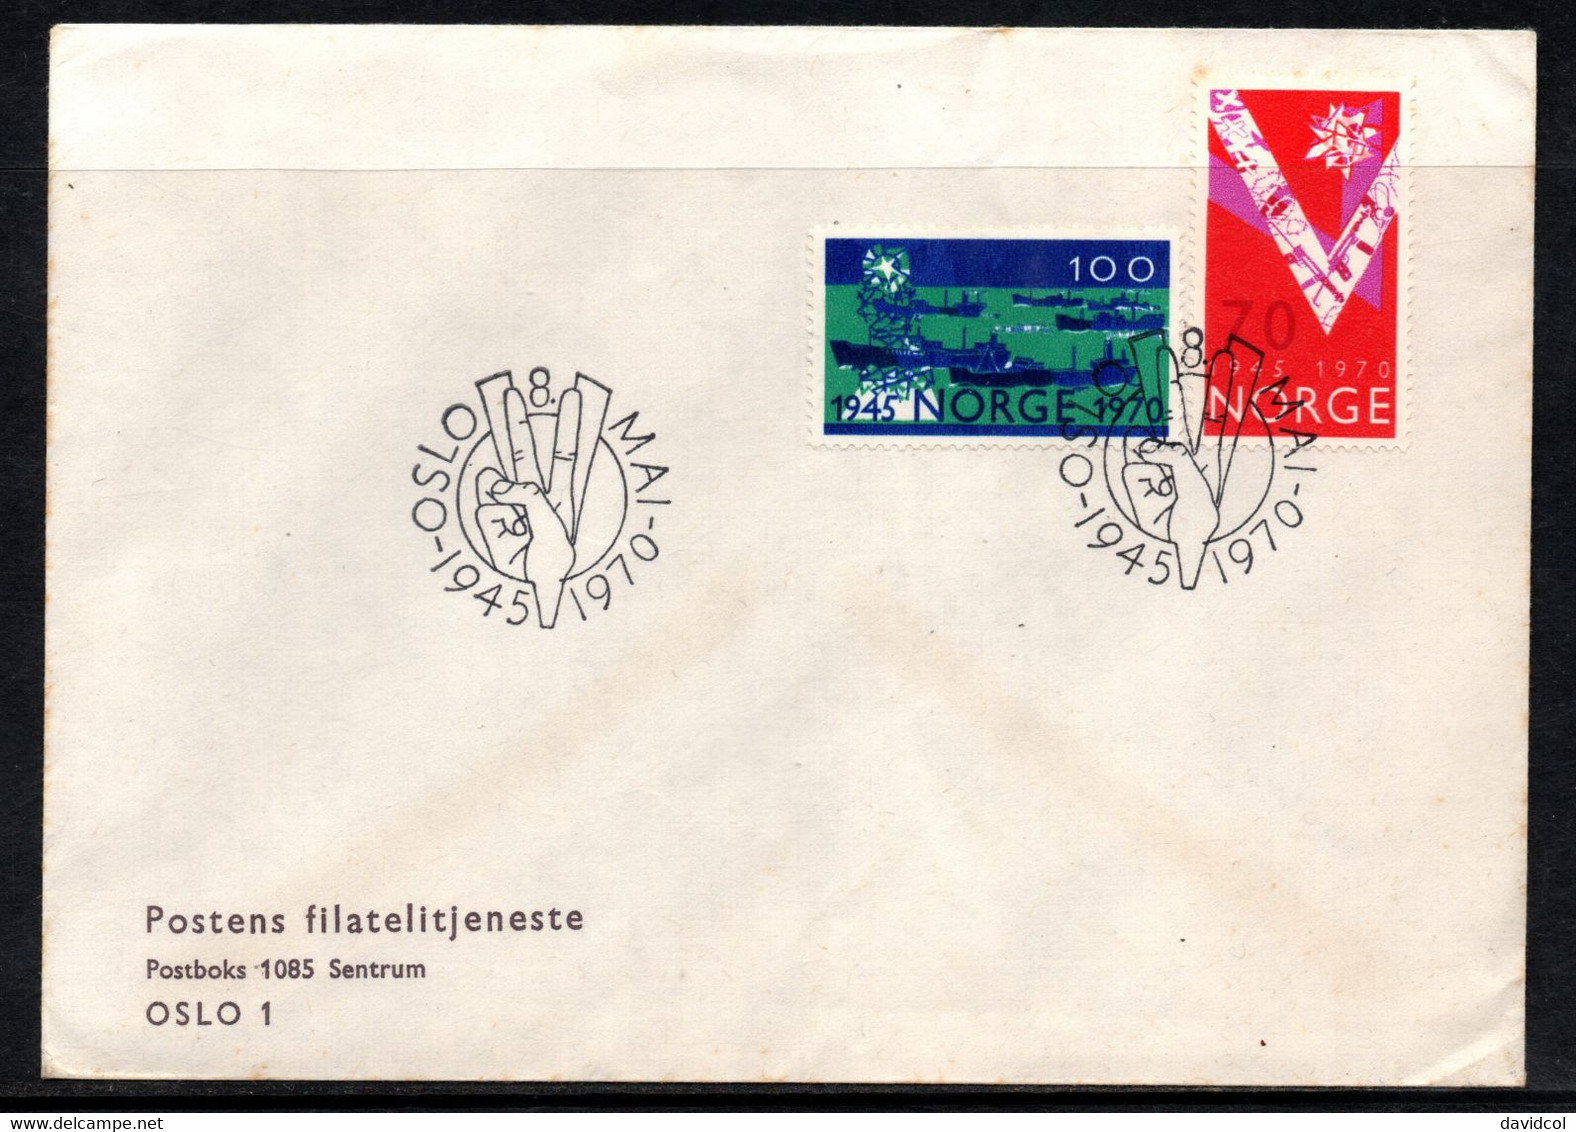 CA190- COVERAUCTION!!! - NORWAY 1970 - OSLO 8-5-70- NORWAY LIBERATION FROM THE GERMANS, 25TH ANNIVERSARY - Brieven En Documenten